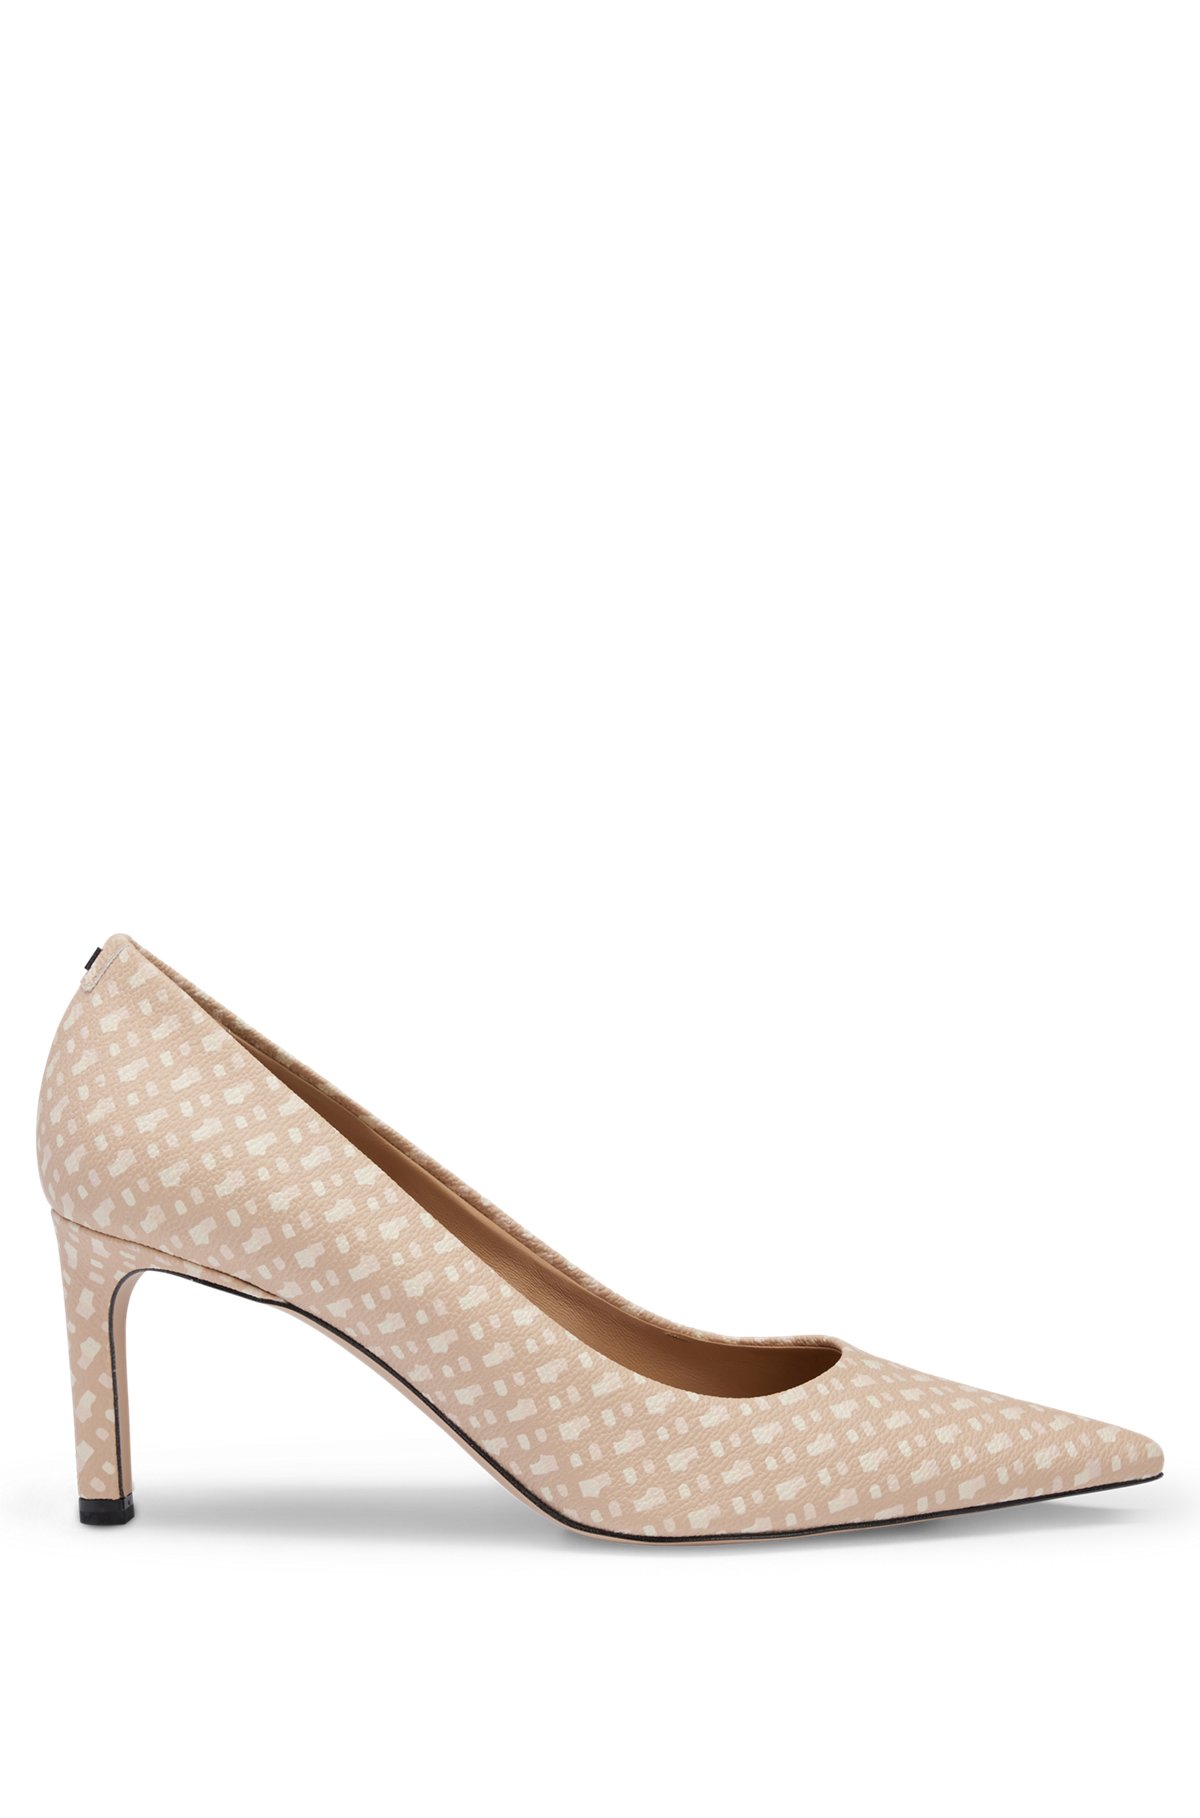 Leather pumps with printed monograms and pointed toe, Light Beige